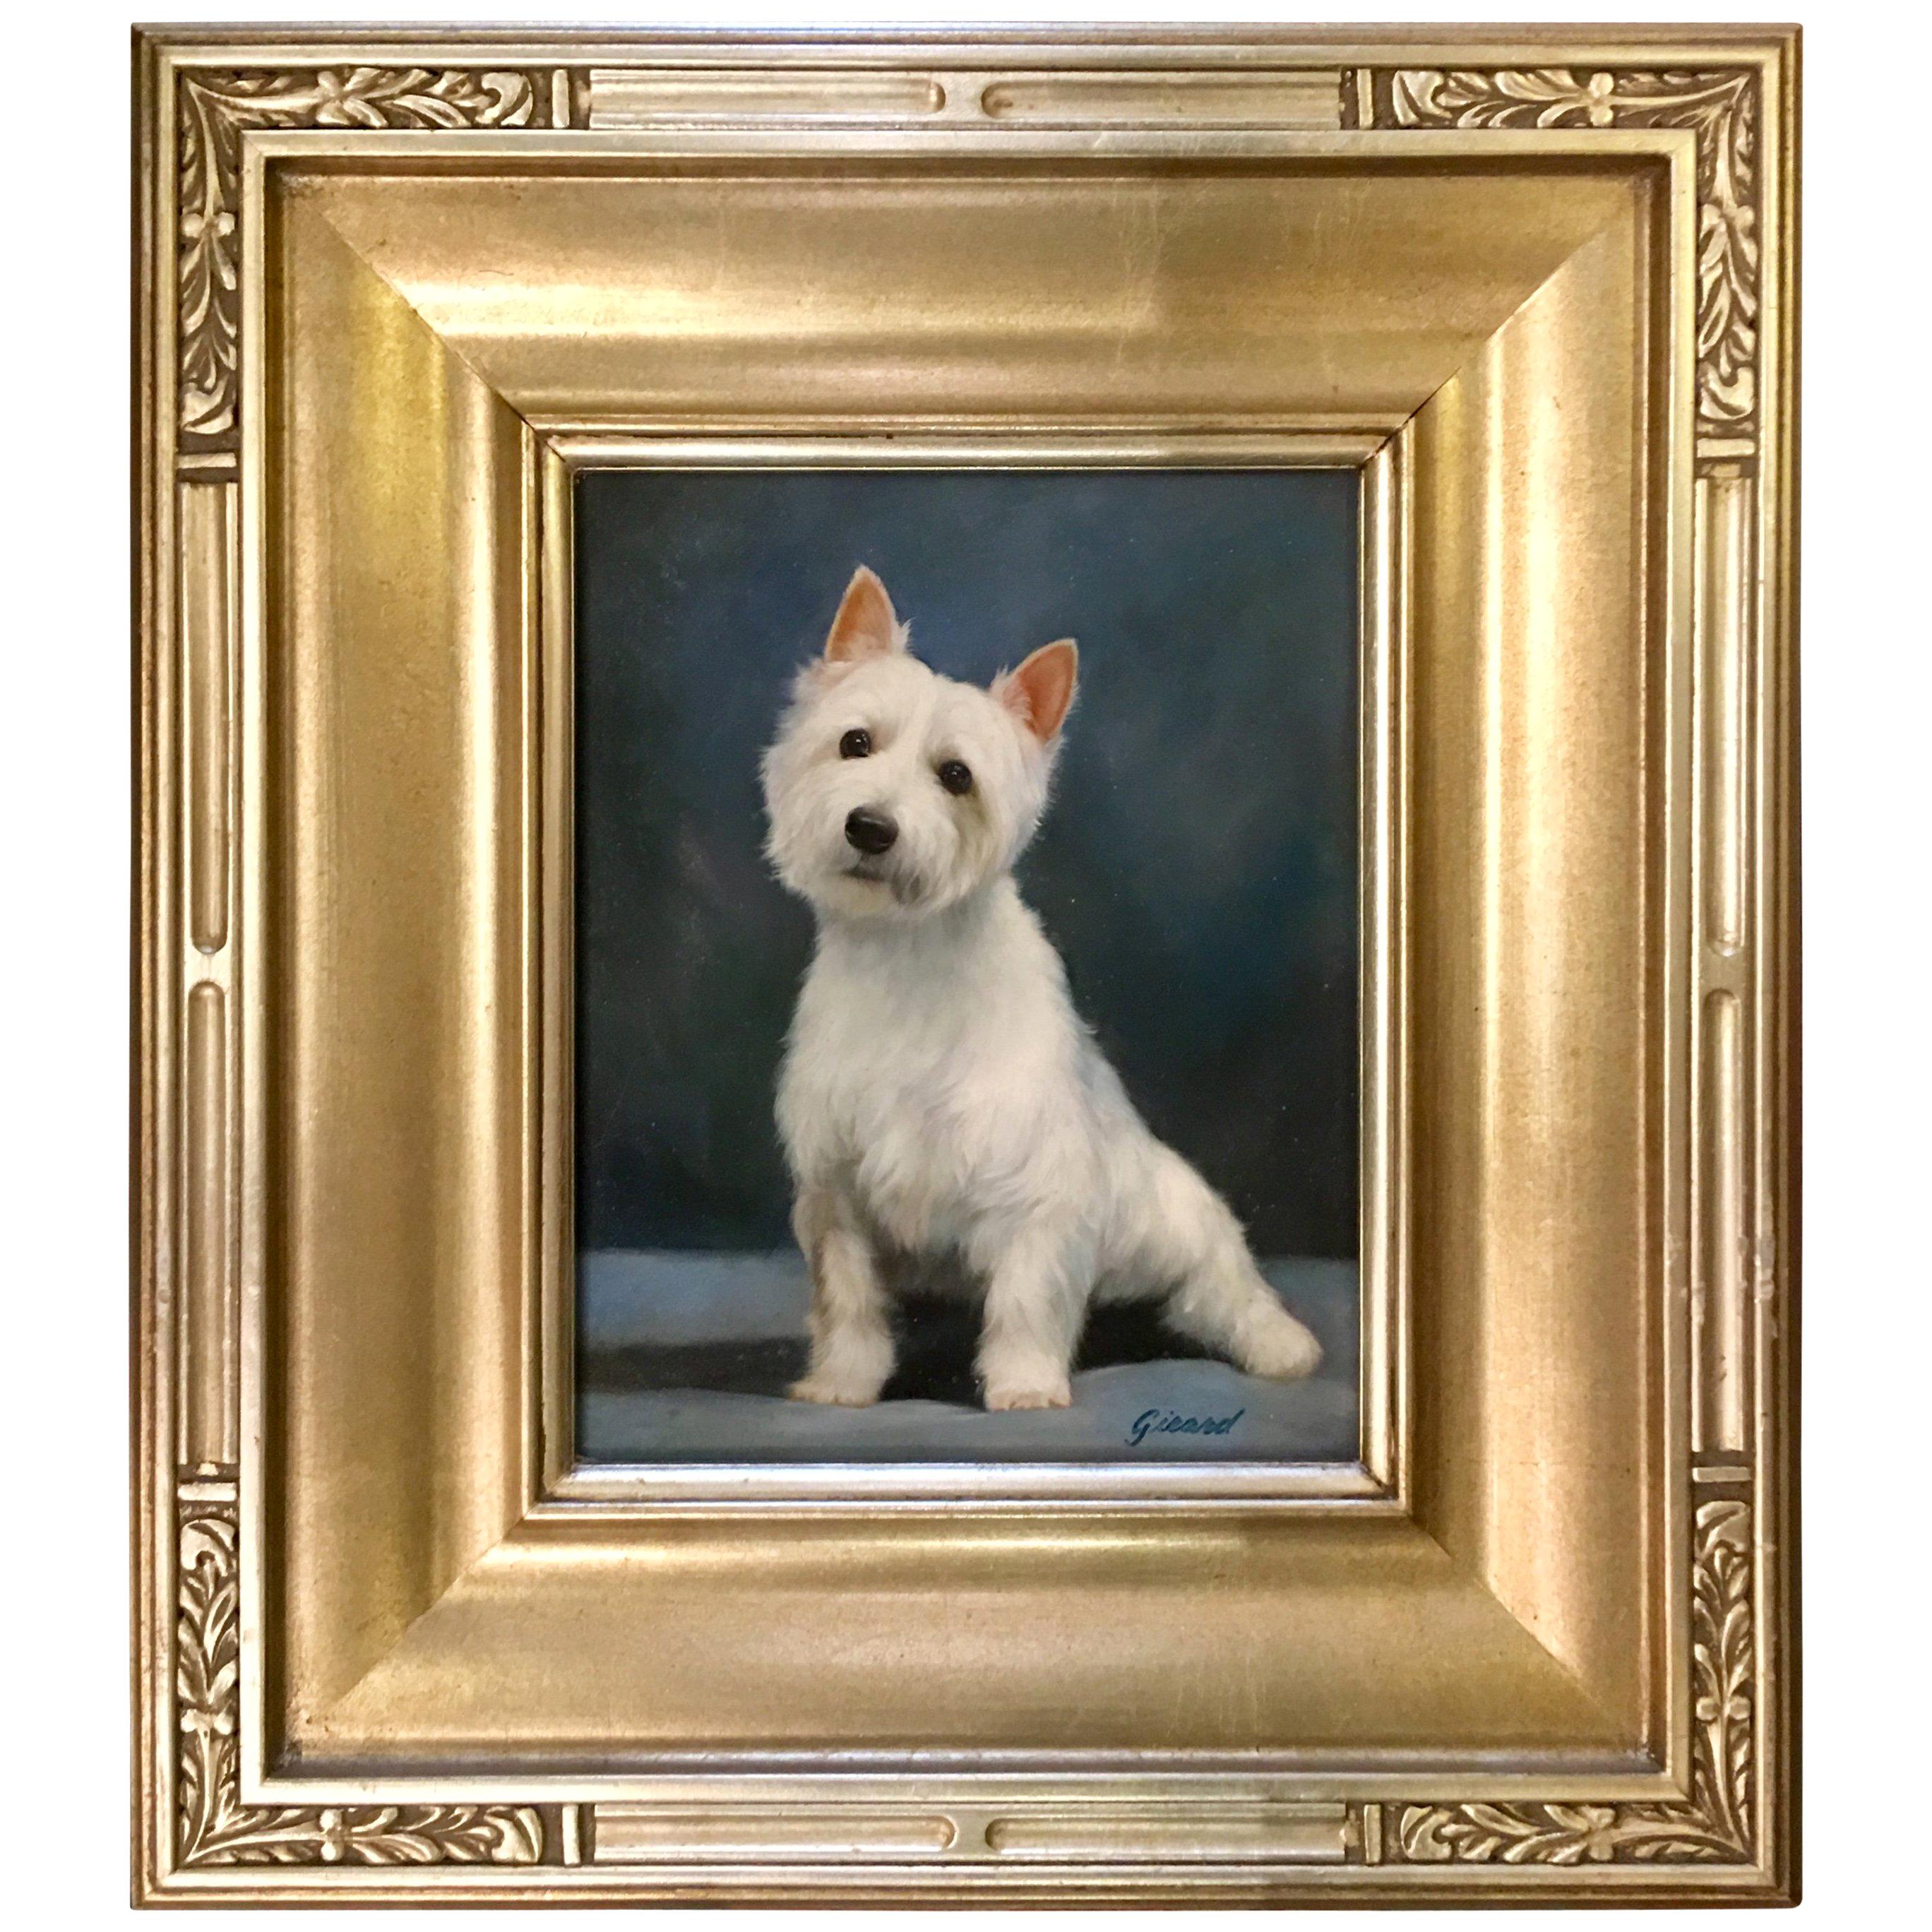 Original Oil Painting Scottish West Highland Terrier by French Artist Girard